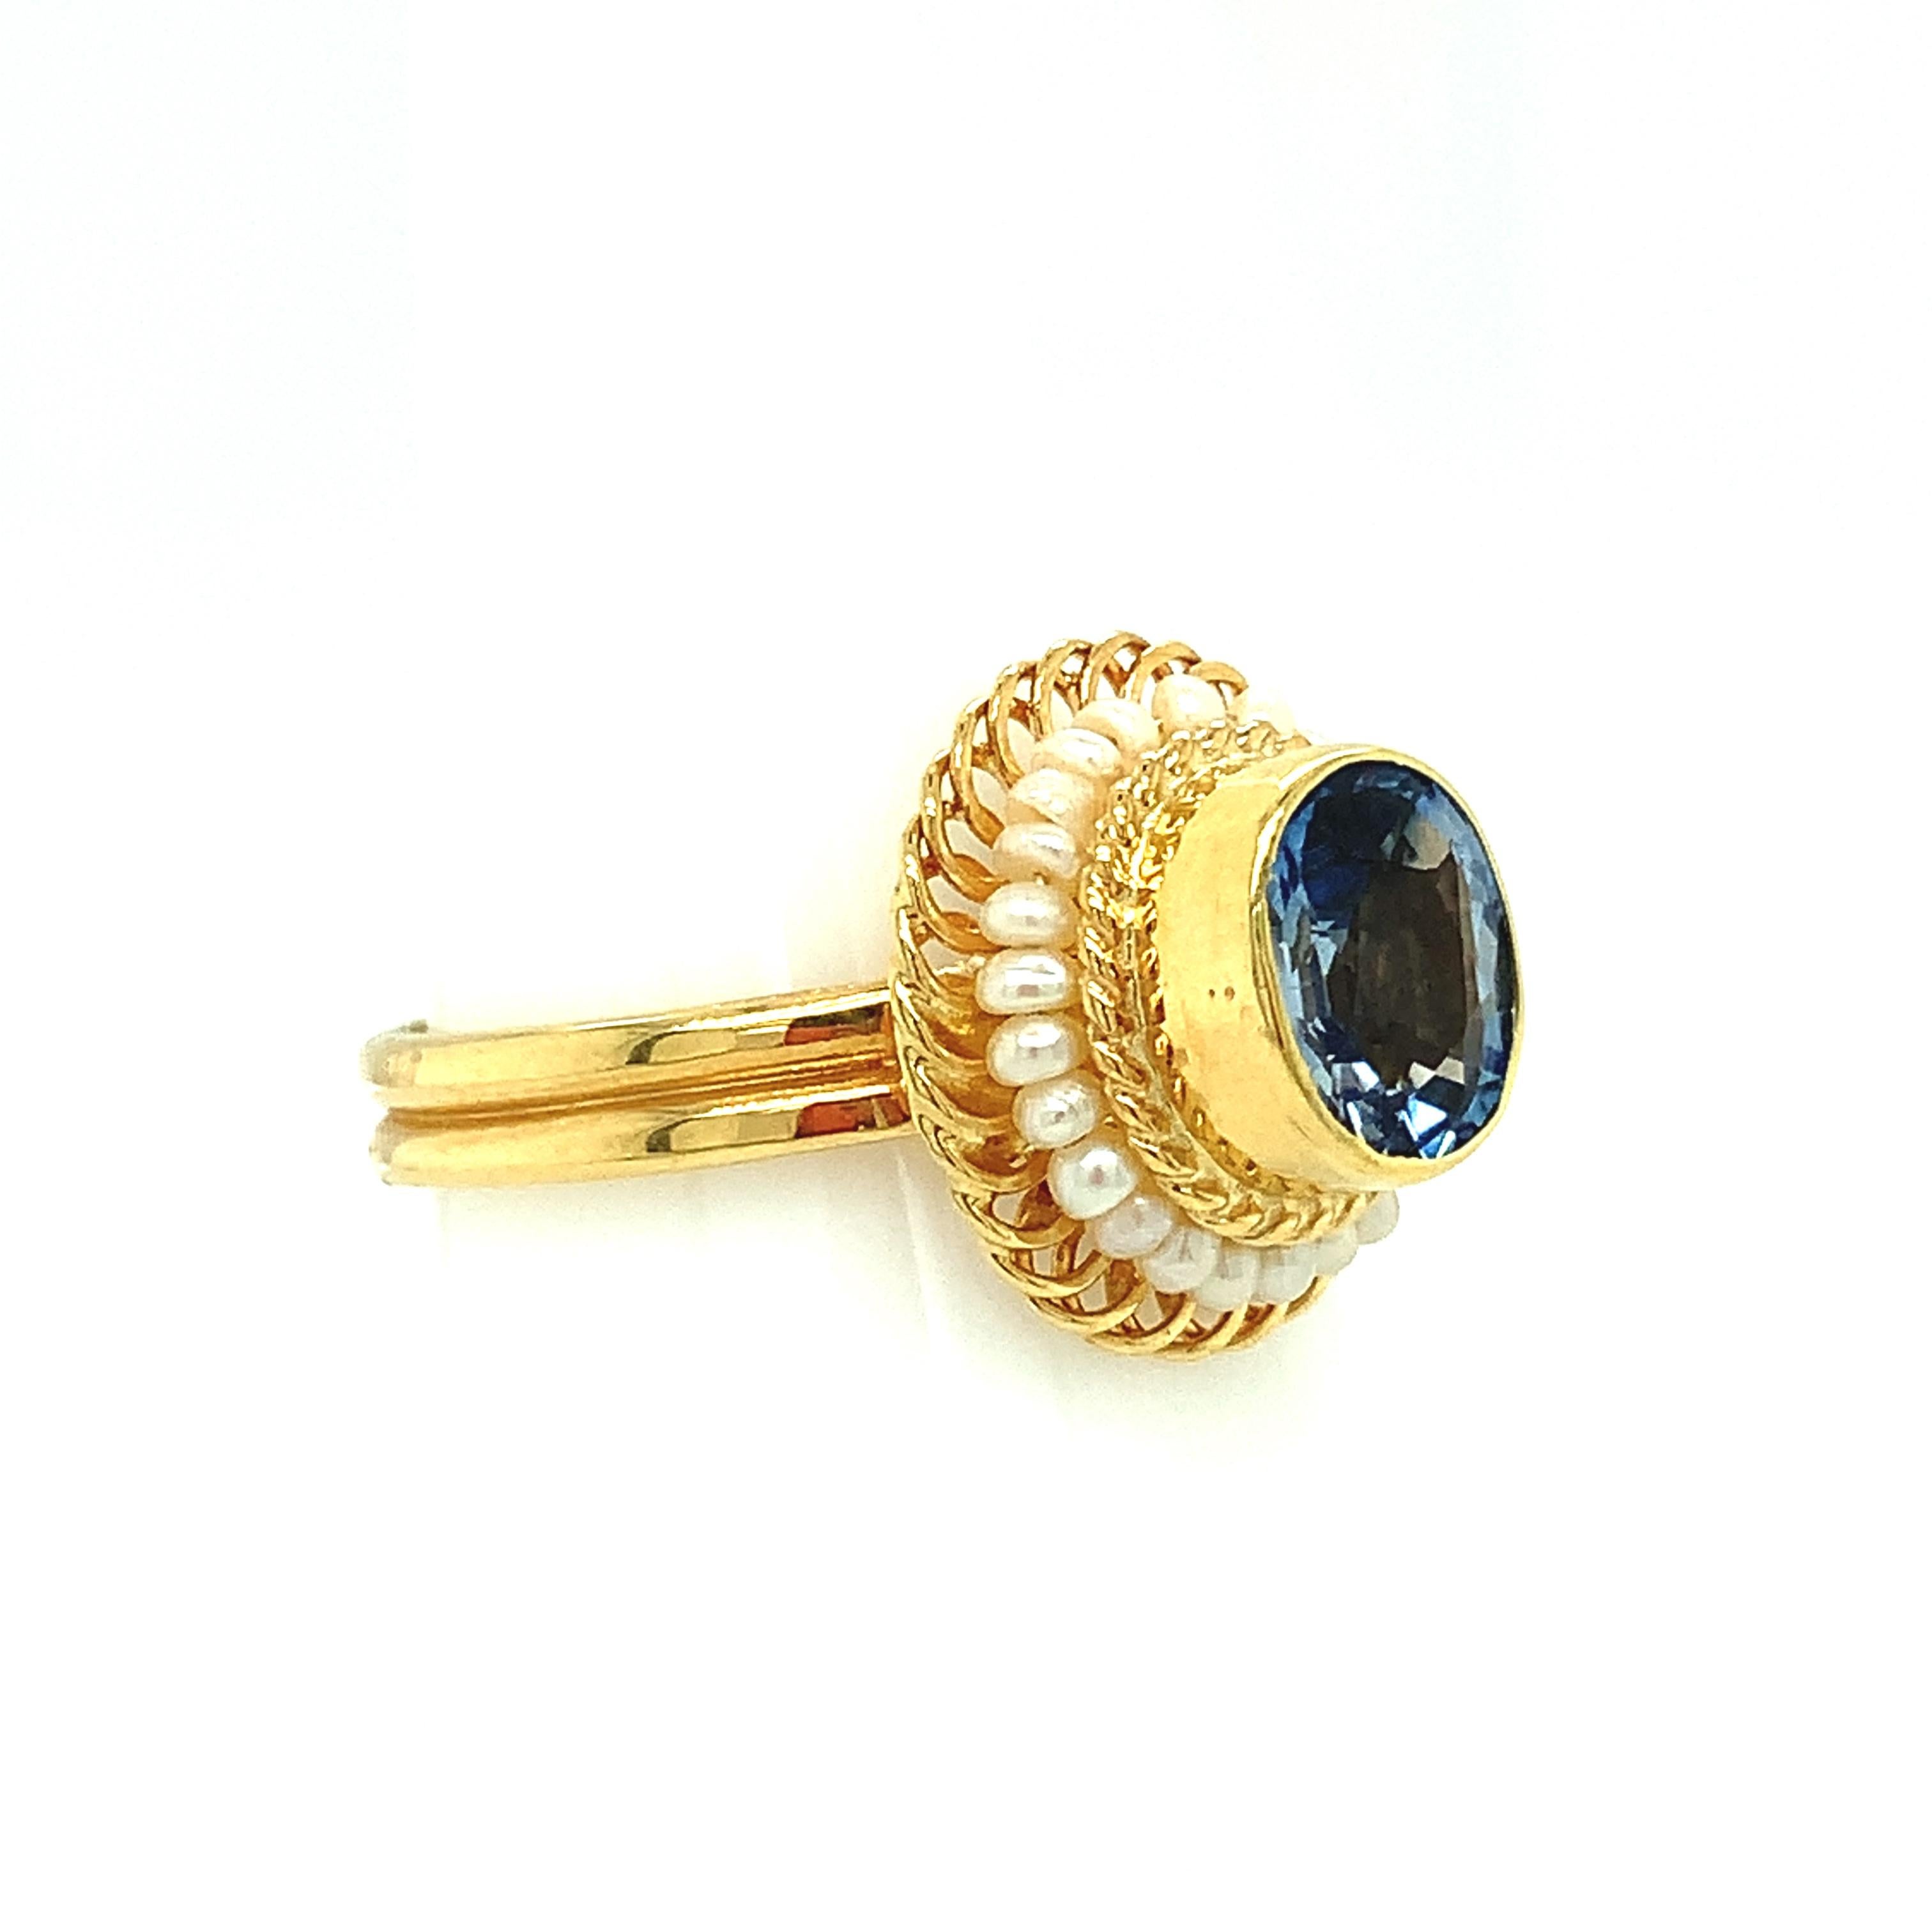 Oval Cut 2.61 Carat Blue Sapphire, Seed Pearl Yellow Gold Filigree Cocktail Ring